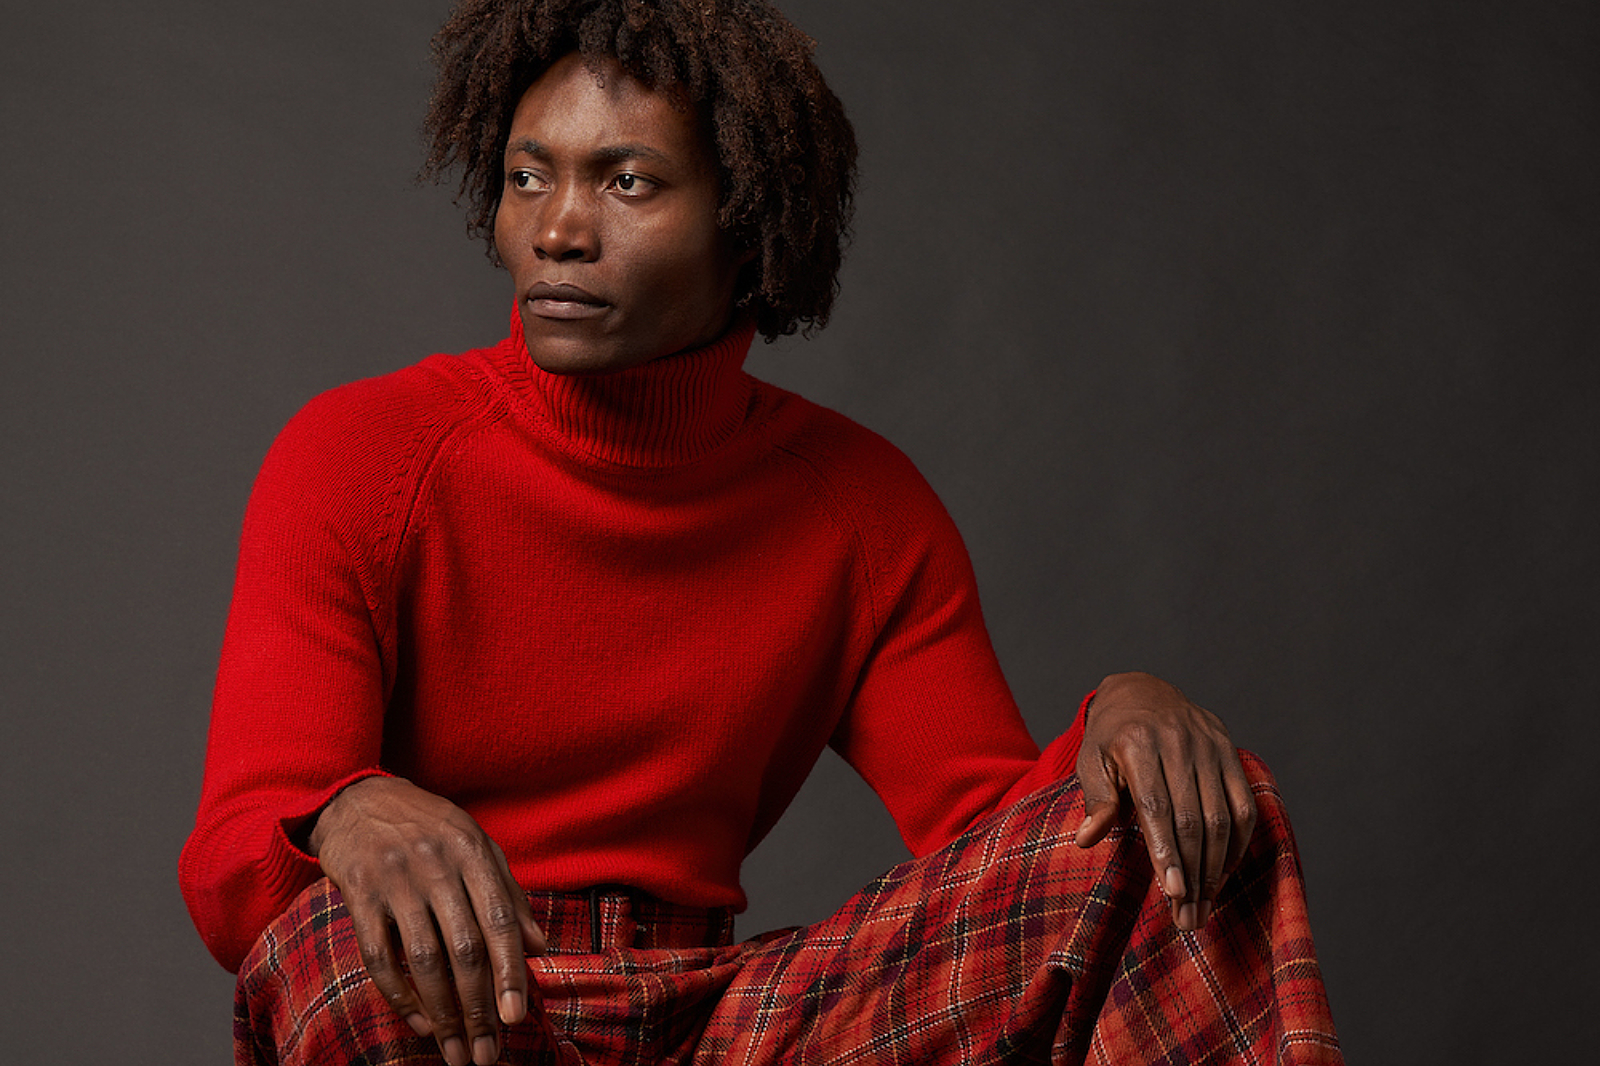 Benjamin Clementine announces new album 'And I Have Been'